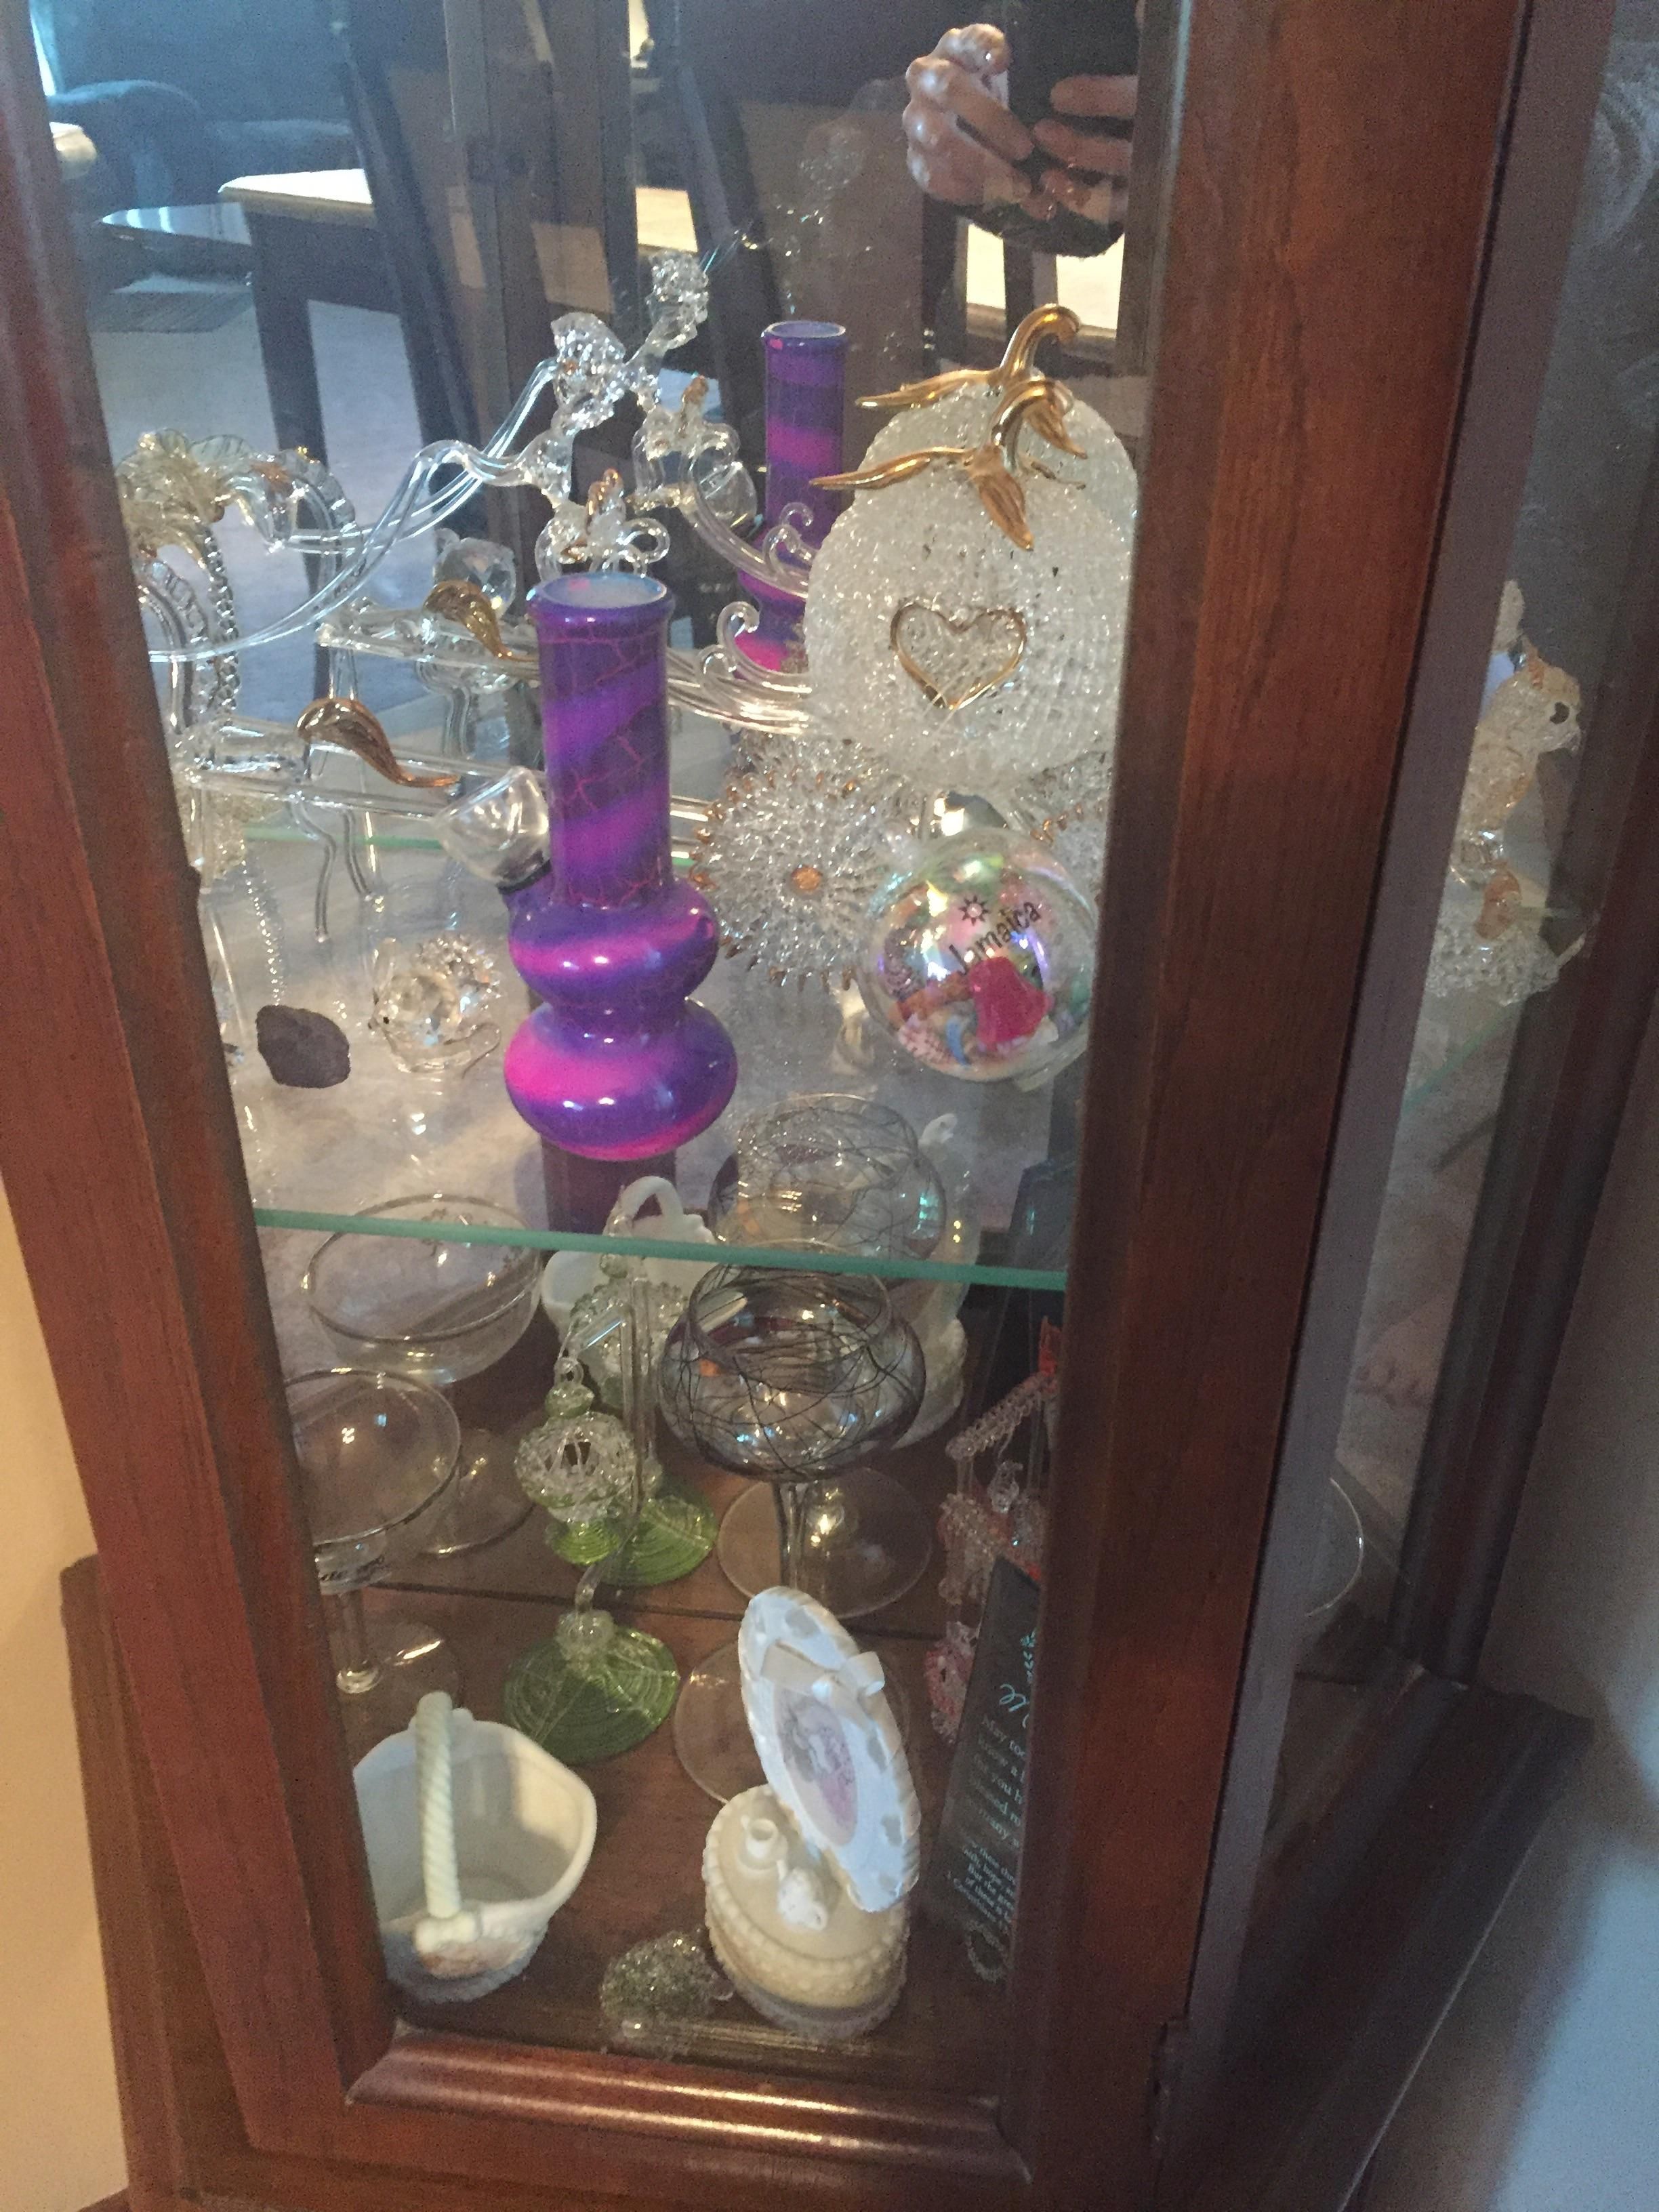 My mom unknowingly bought a bong for her crystal/glass collection. We have no intention of telling her.